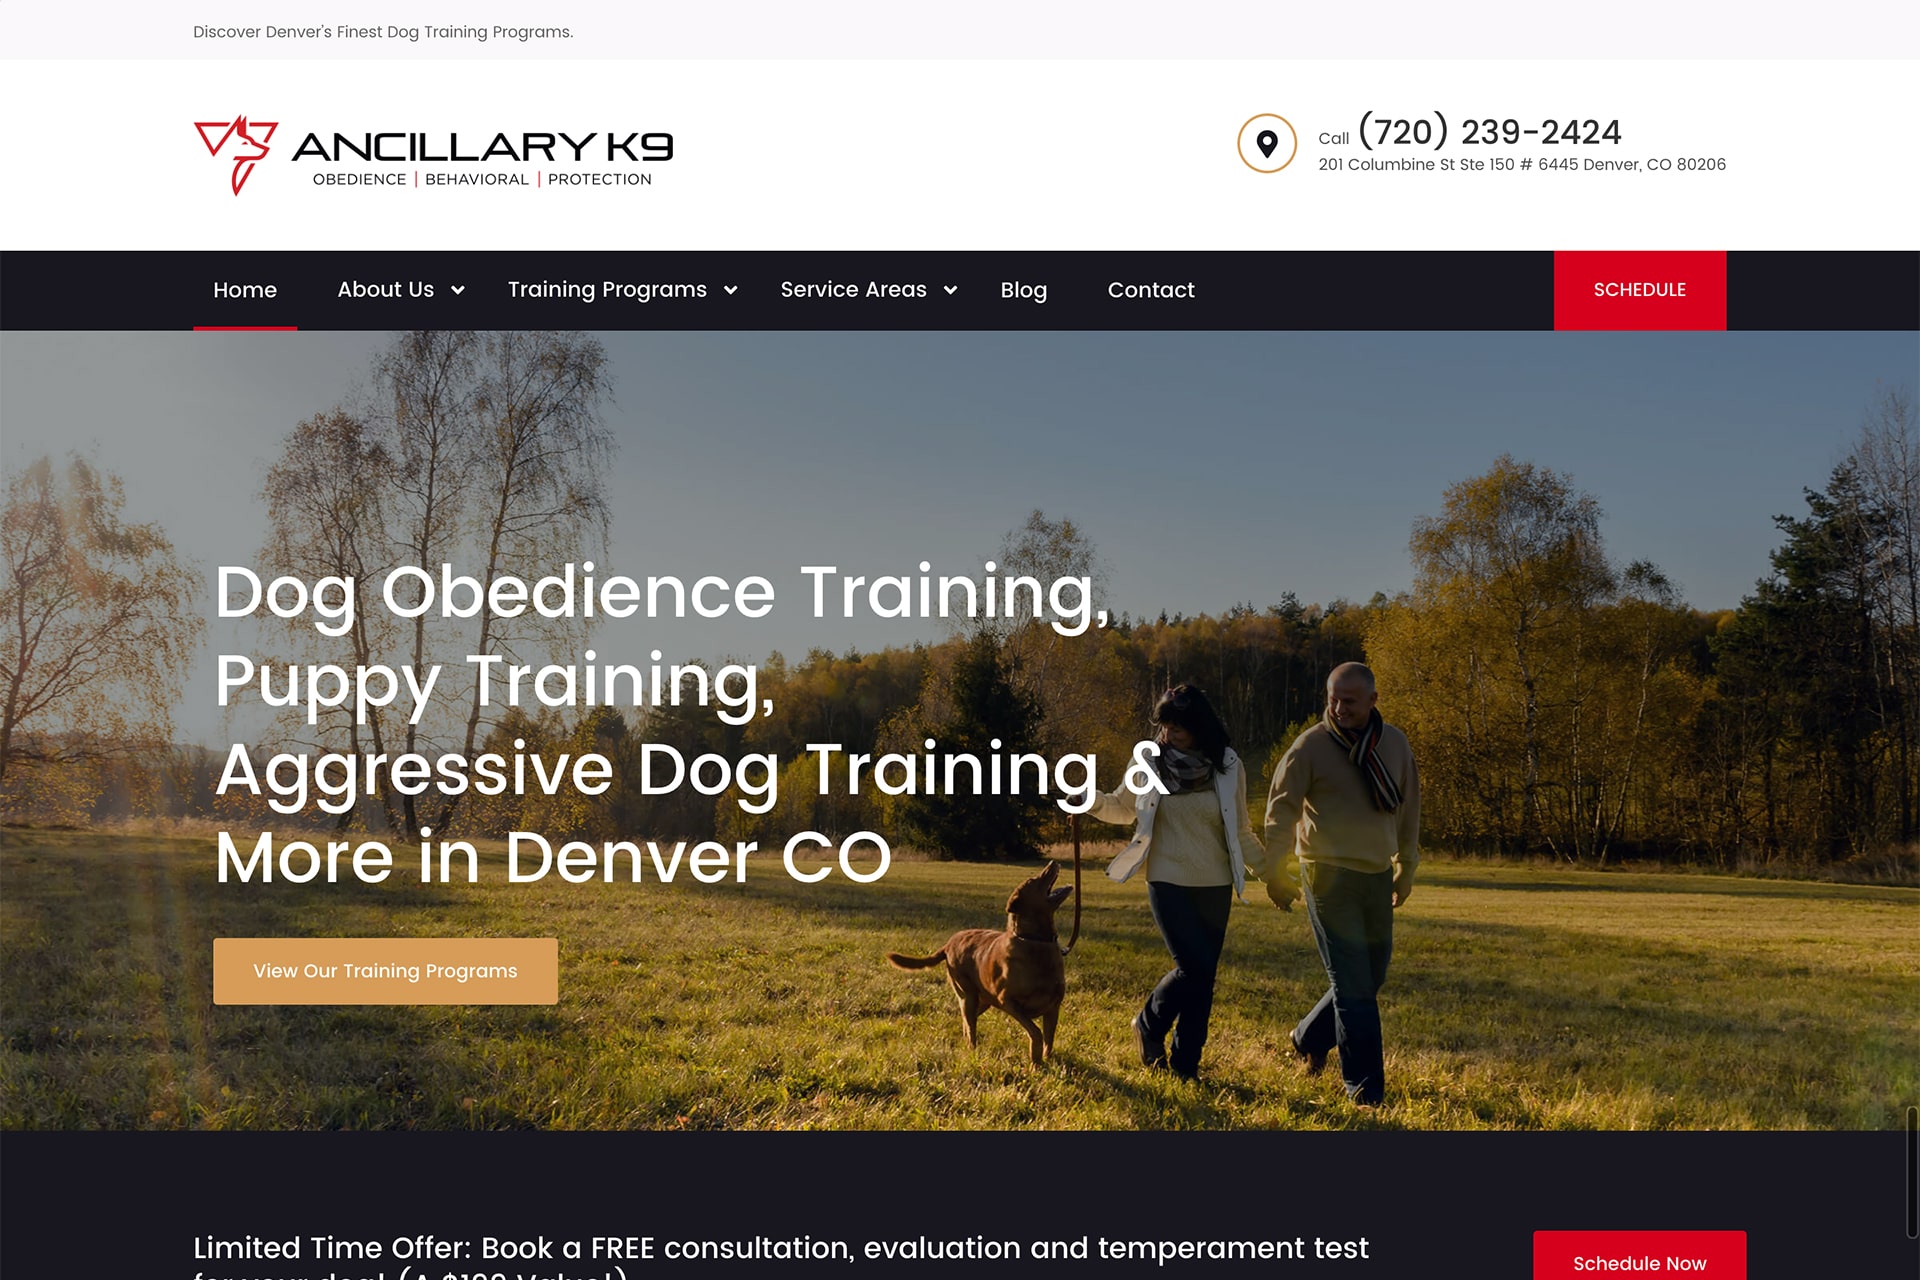 Weebly website example 23 - Anchillary K9 Pet Service